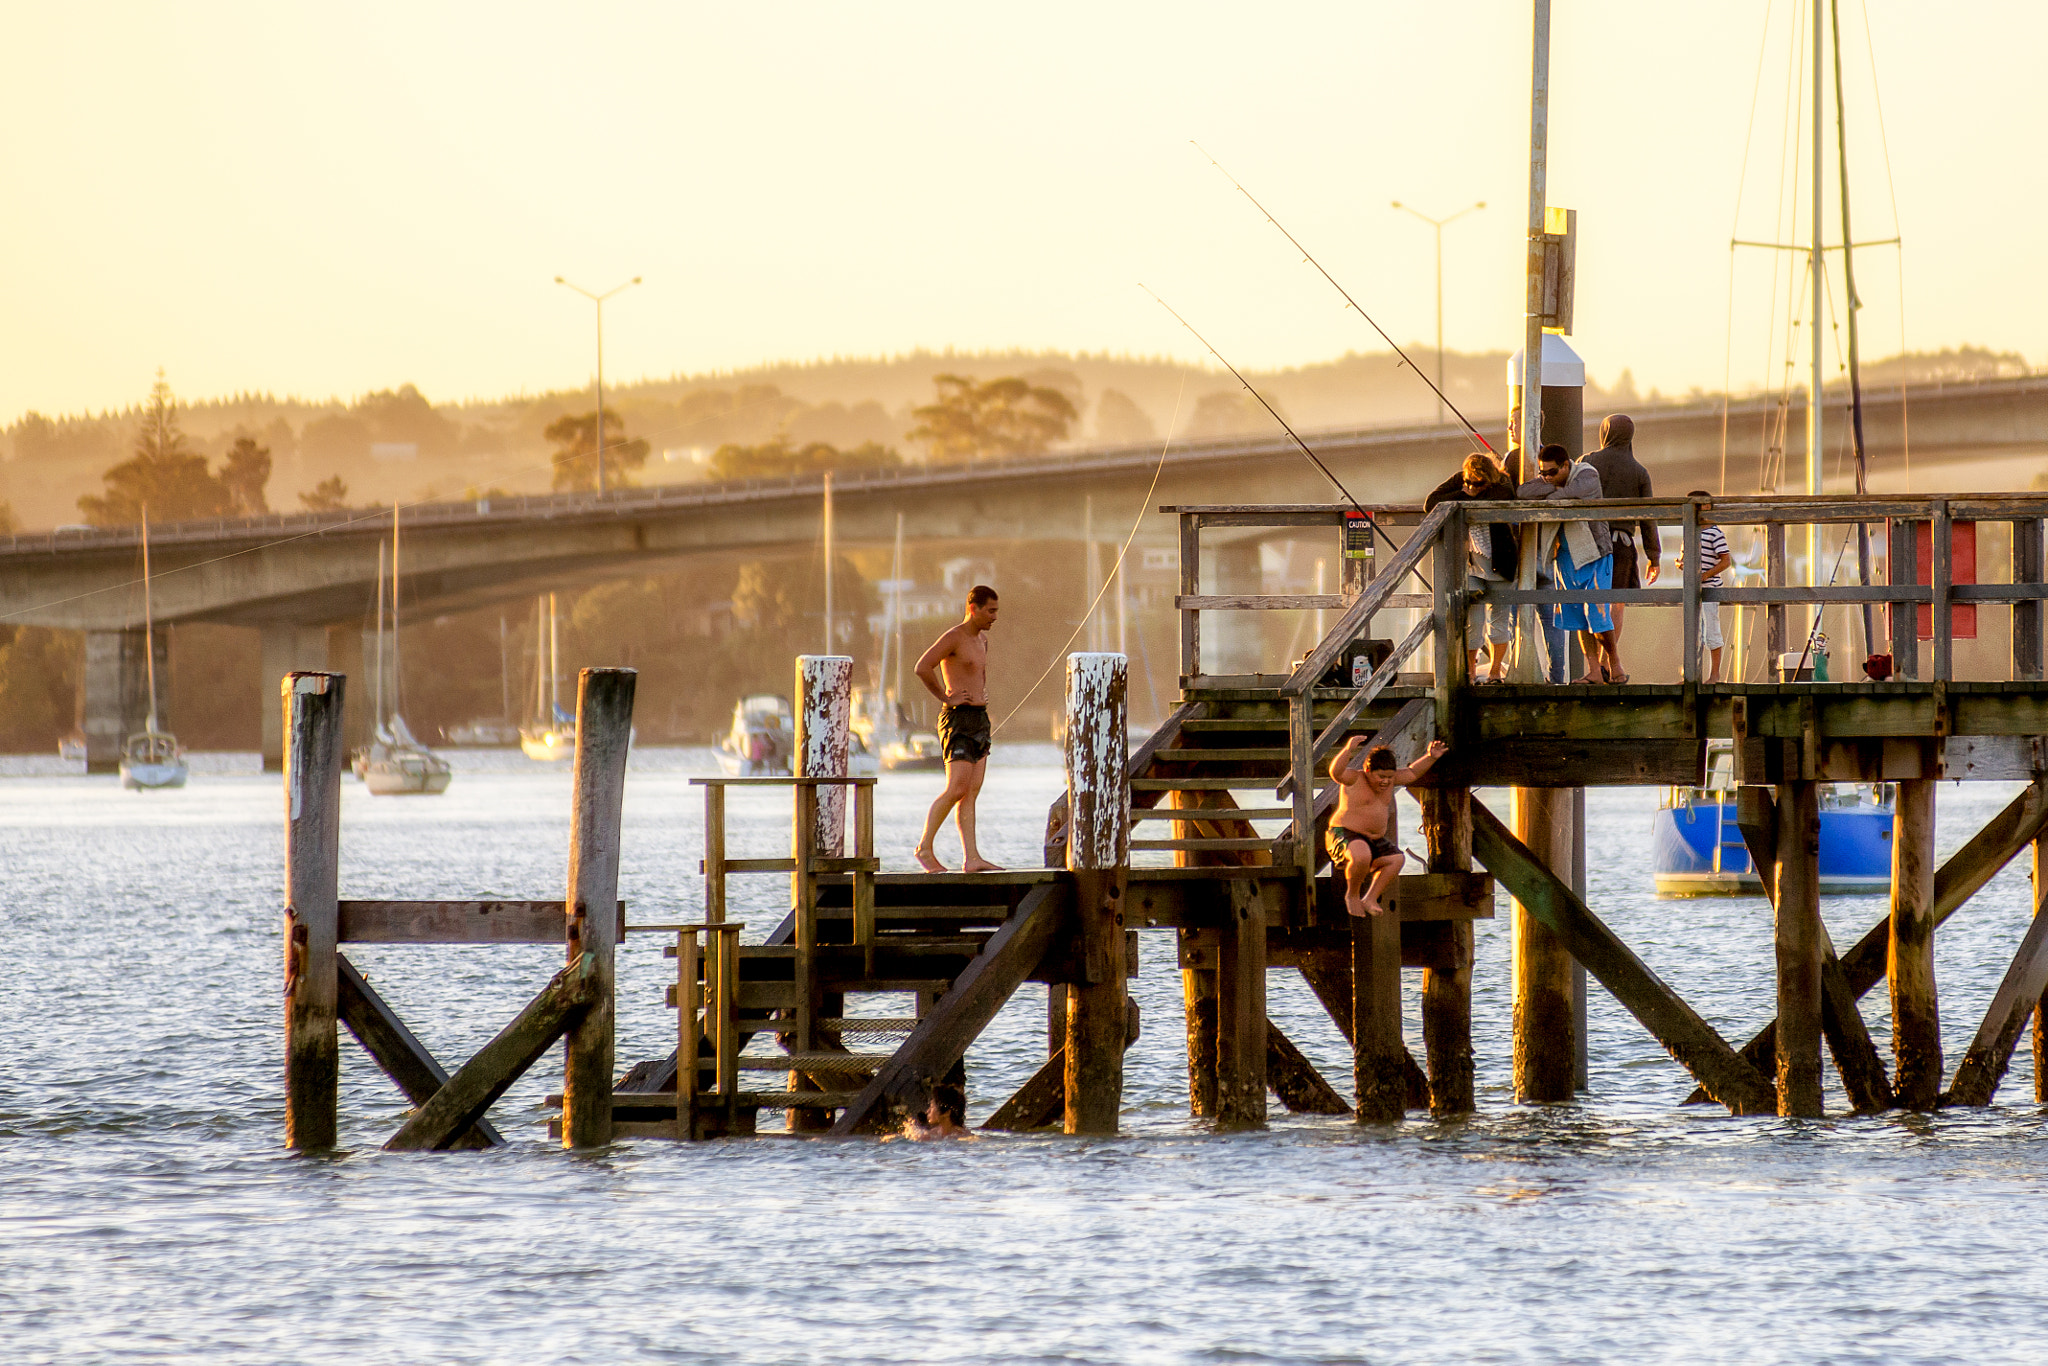 Nikon D7100 + AF-S Zoom-Nikkor 80-200mm f/2.8D IF-ED sample photo. A typical evening at beach haven wharf photography